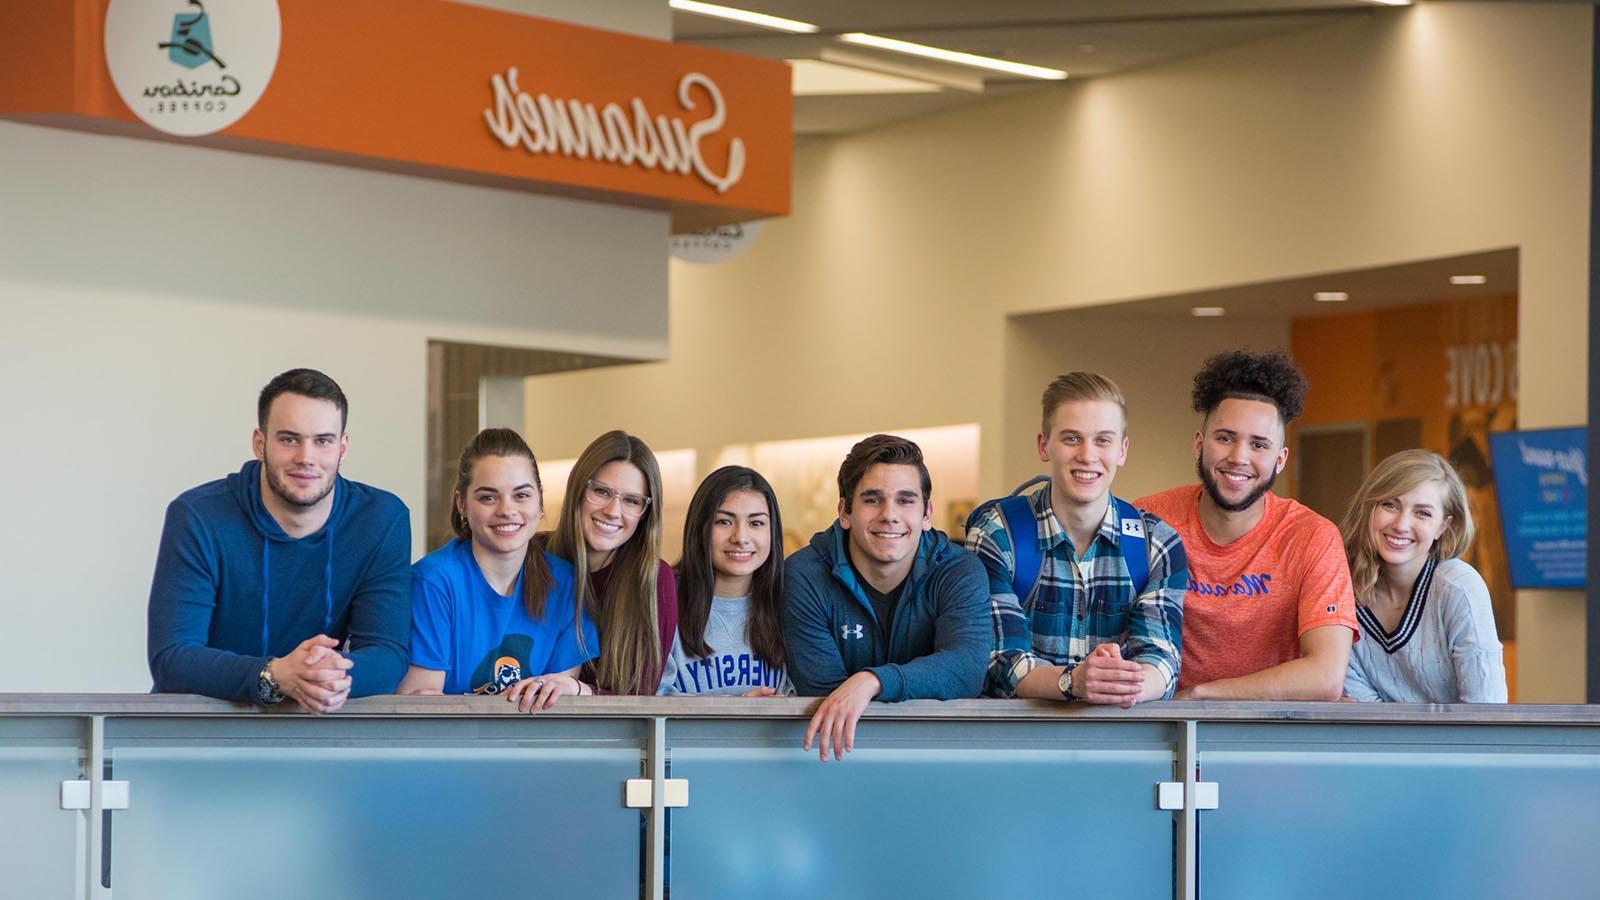 Eight University of Mary students smiling and overlooking balcony in the Lumen Vitae University Center